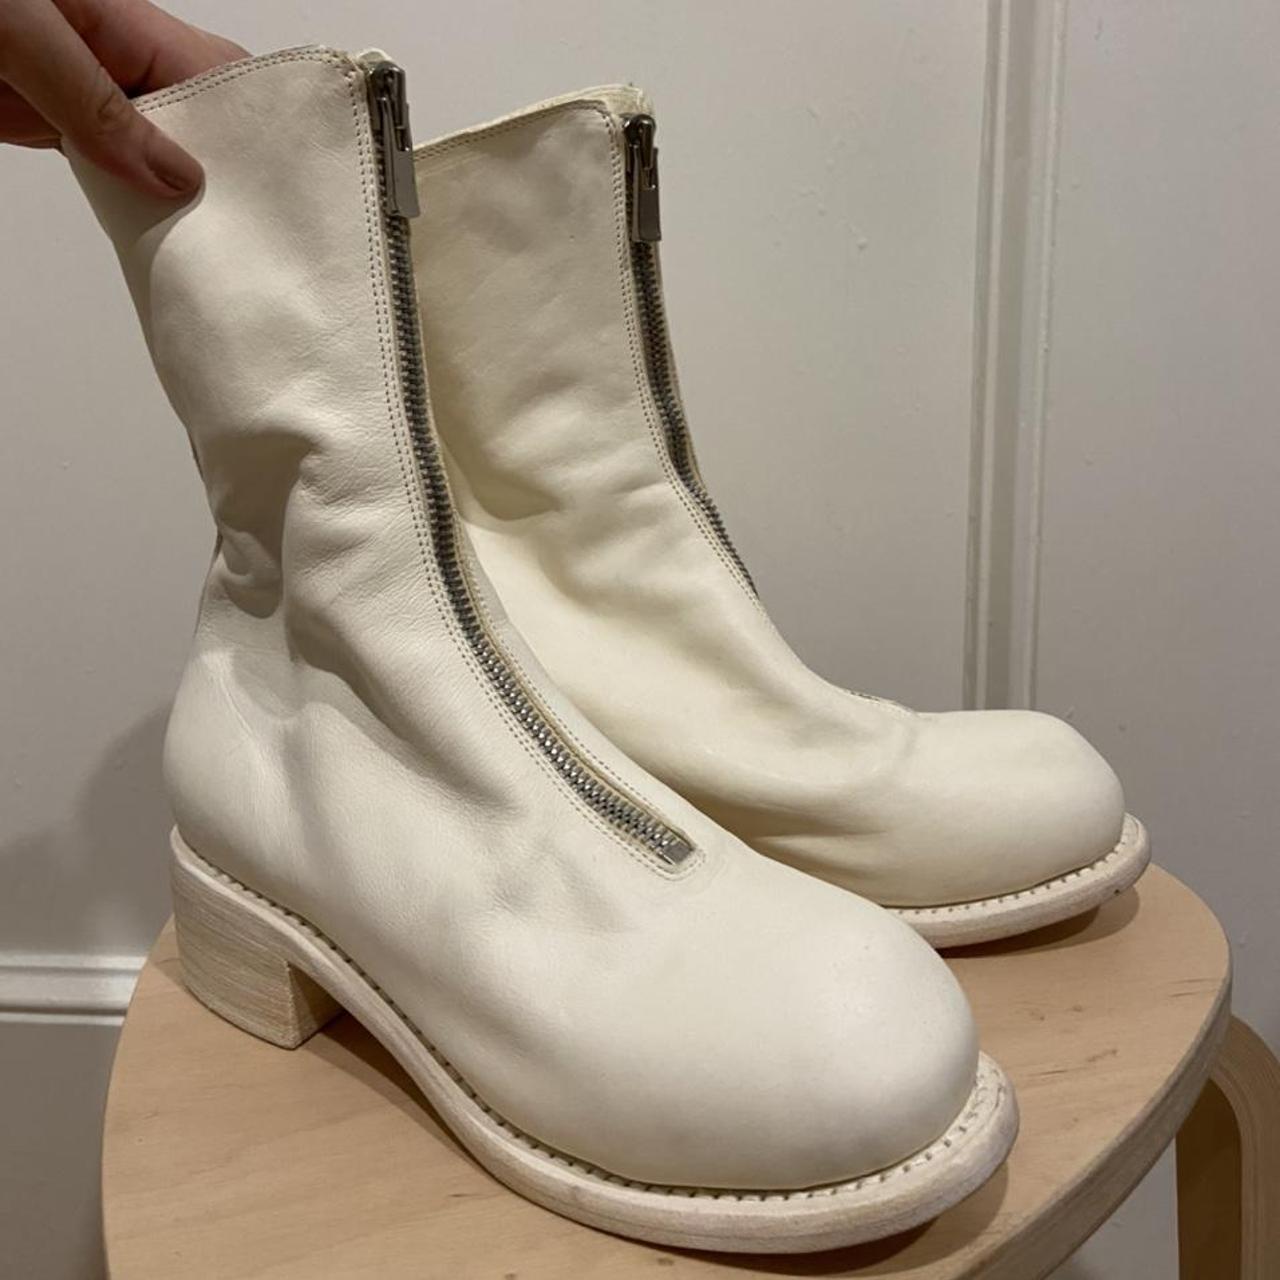 Product Image 2 - WHITE GUIDI BOOTS WITH ZIPPER!

Excellent